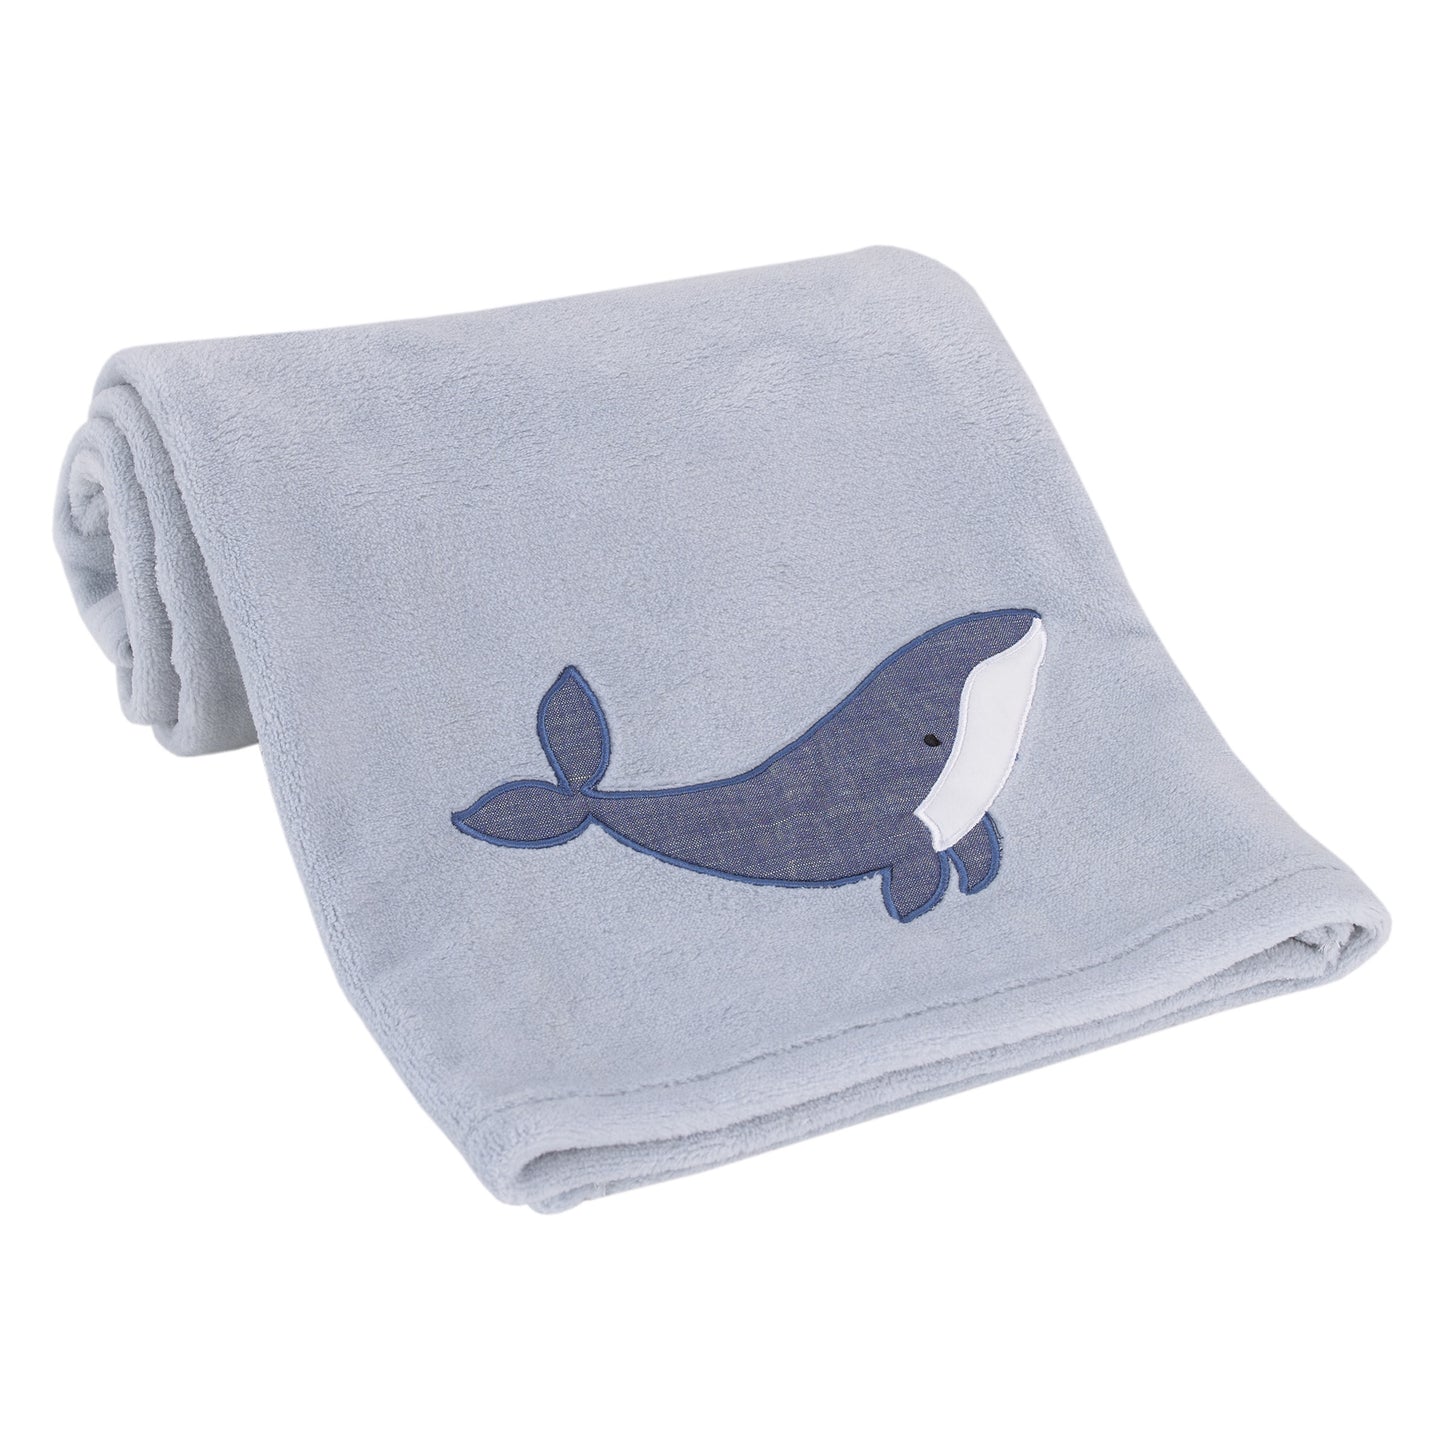 NoJo Marine Light Blue, Navy, and White Whale Applique Super Soft Baby Blanket